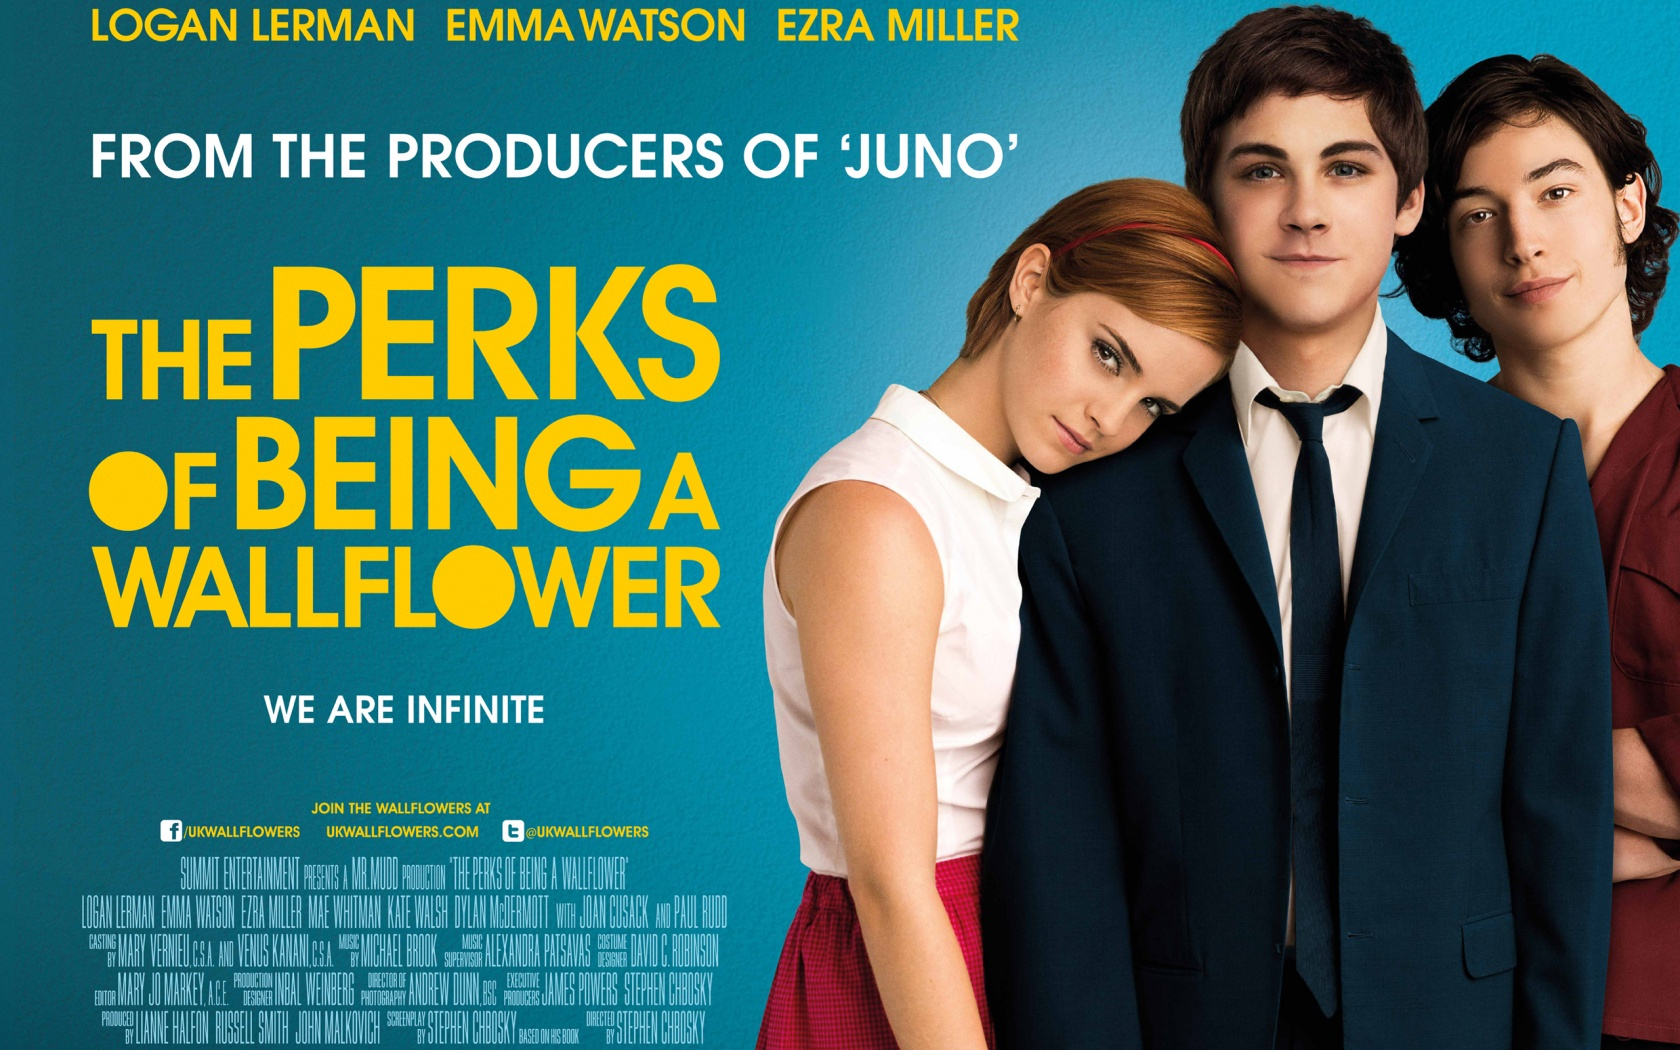 the perks of being a wallflower wallpaper,poster,movie,font,white collar worker,formal wear